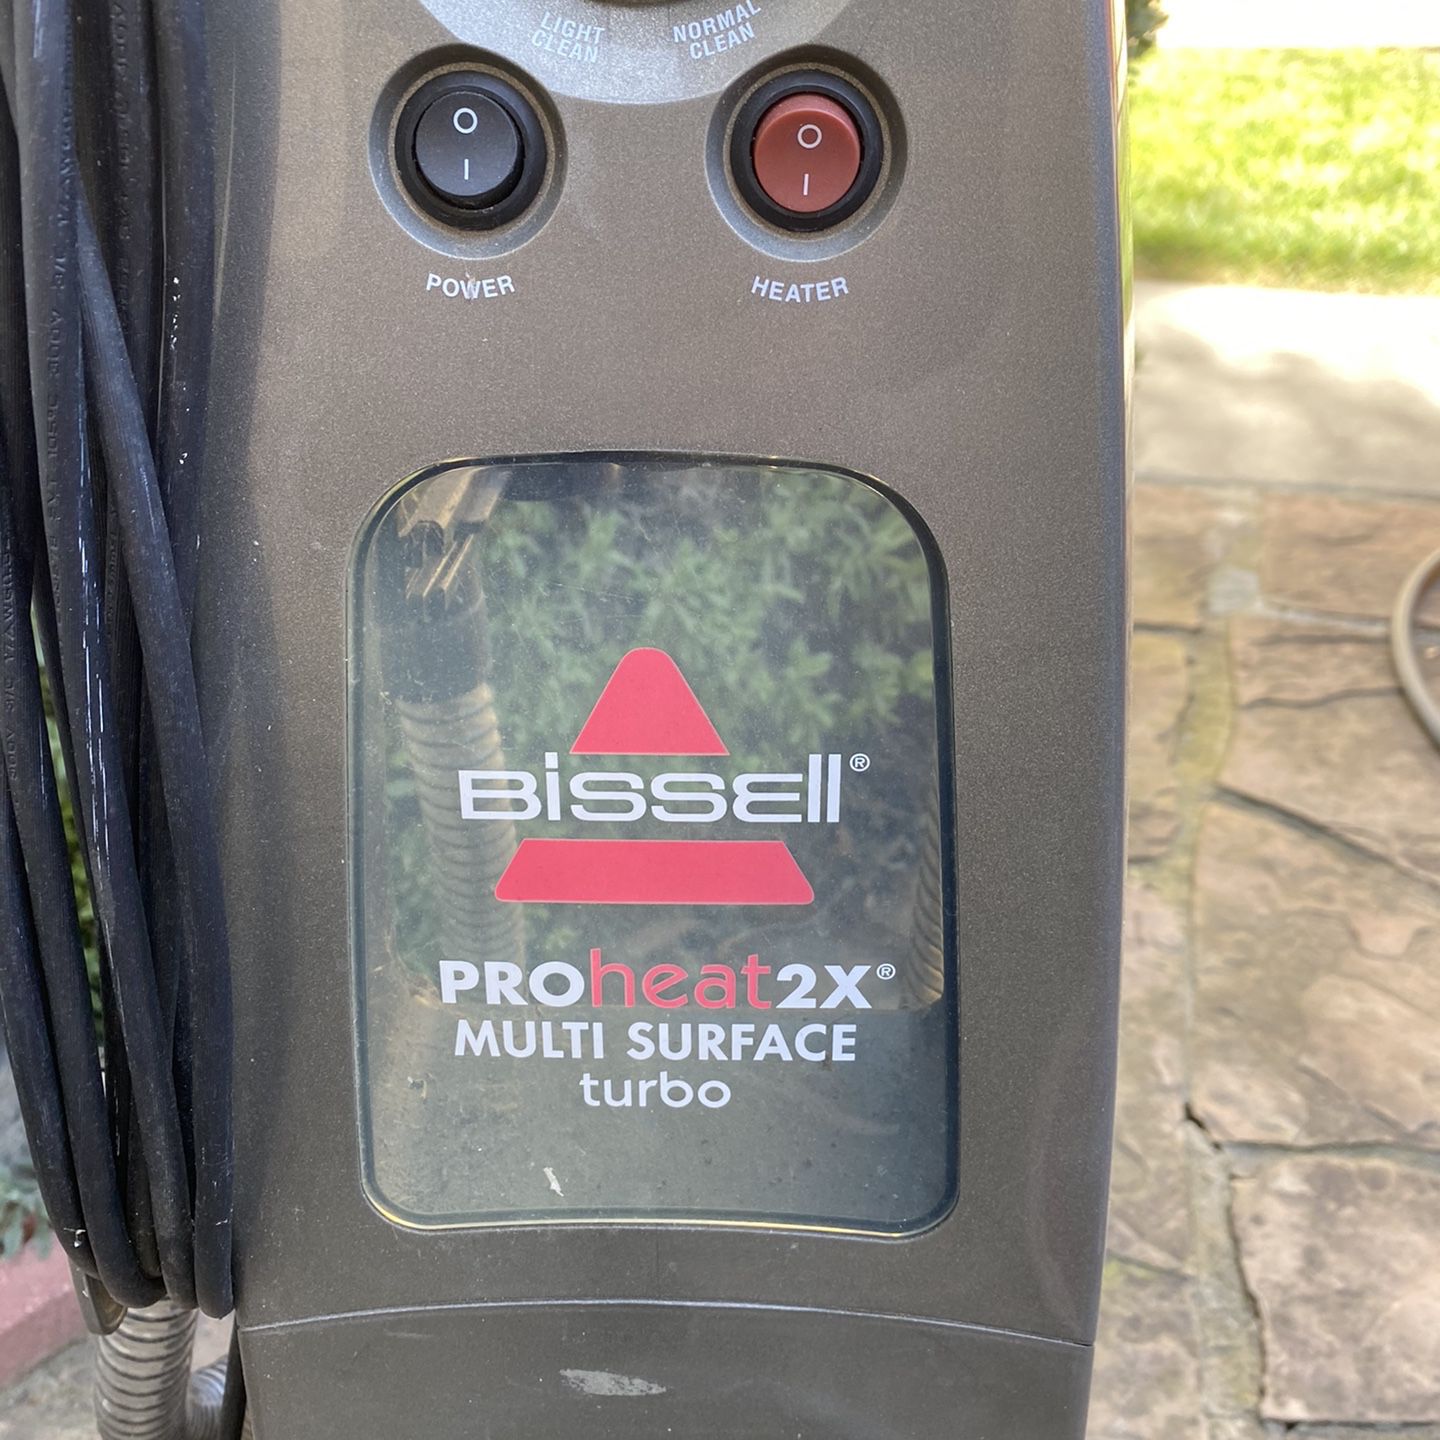 Pro 2X Multi surface BISSELL